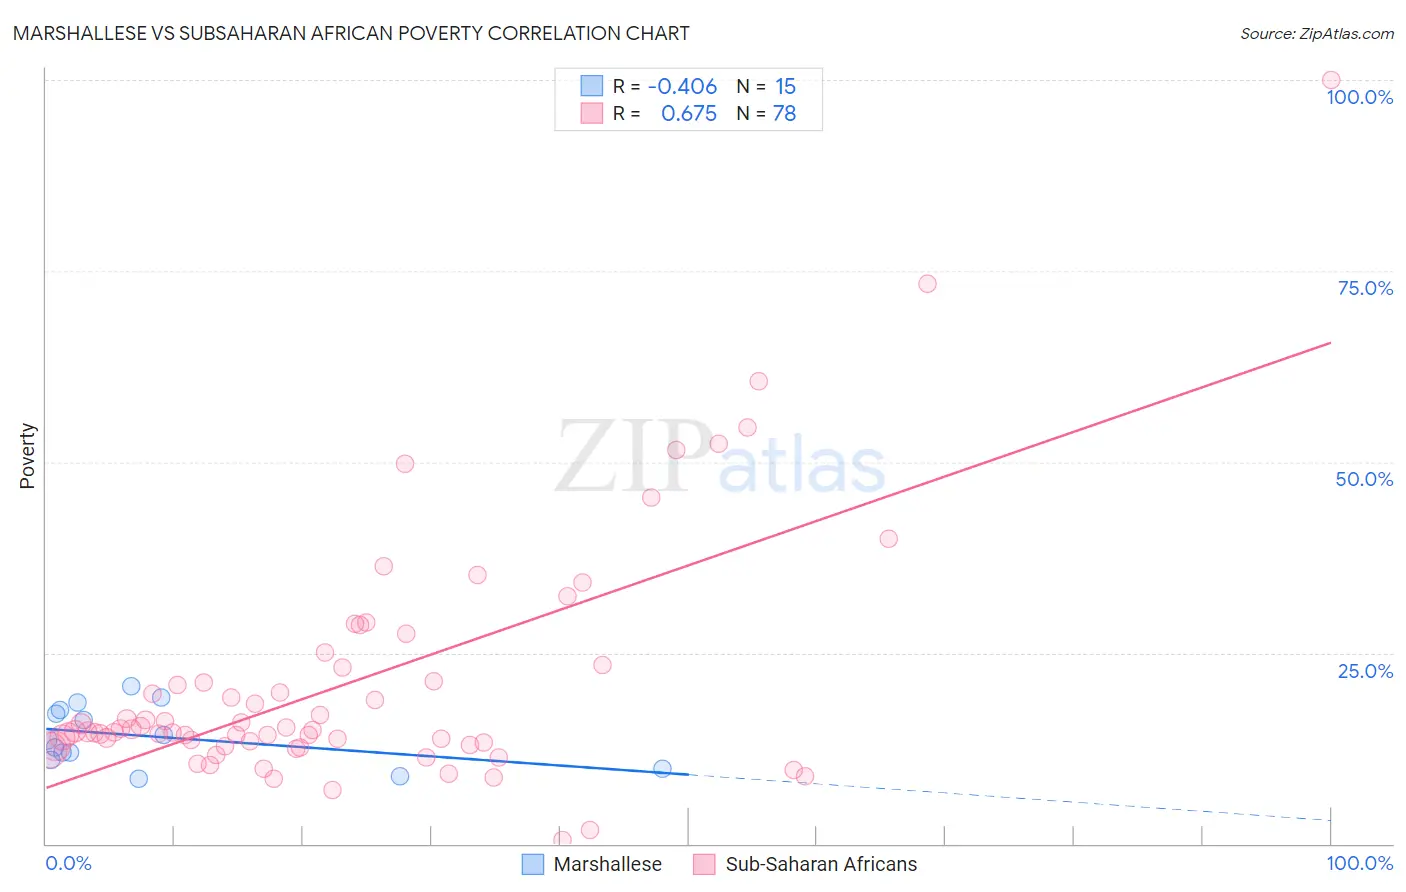 Marshallese vs Subsaharan African Poverty